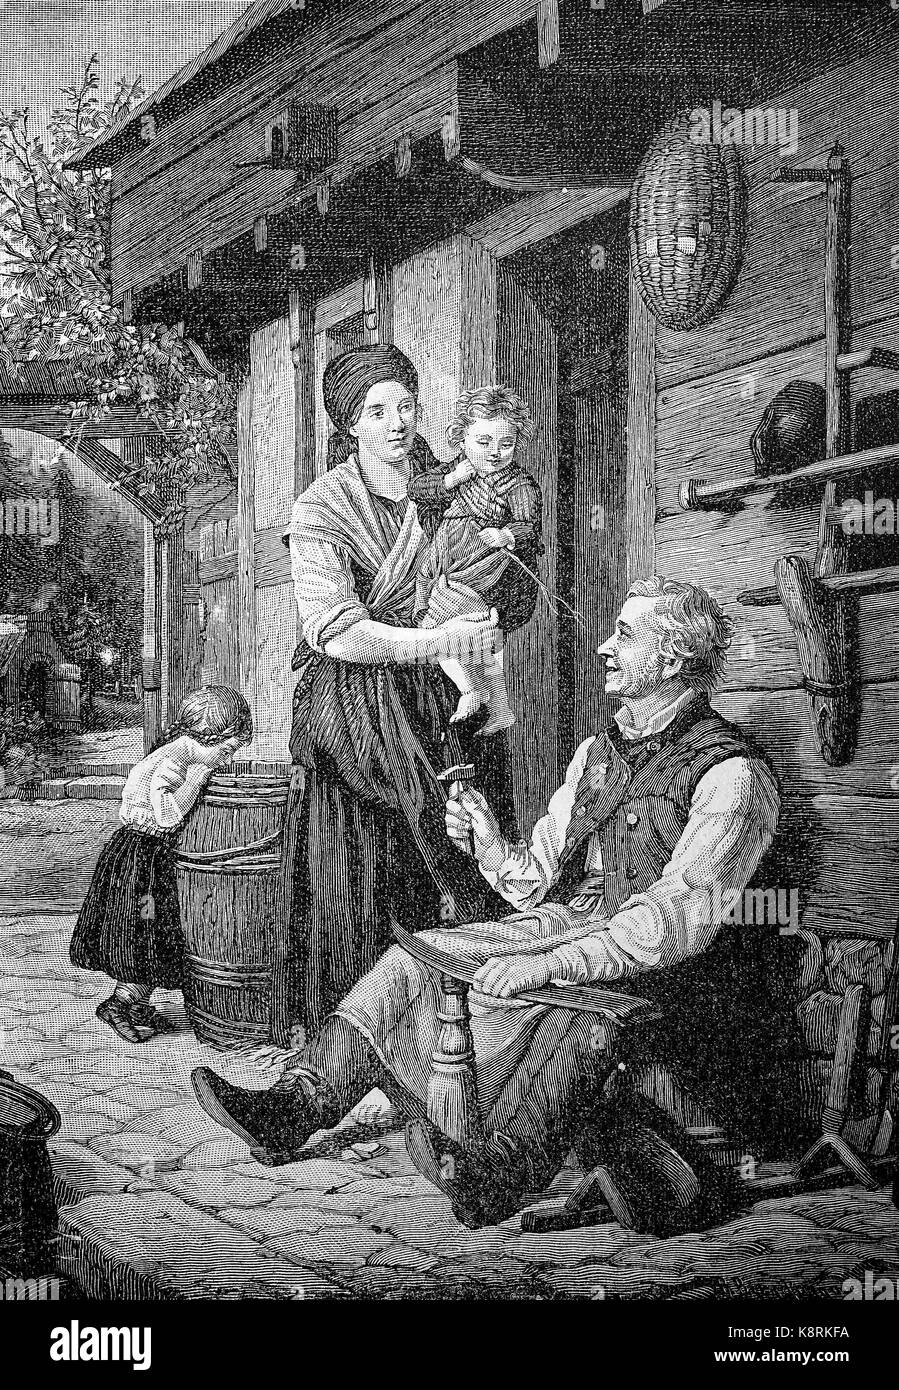 End of the working day, farmer sharpening the scythe, wife with two small children, in front of the farmhouse, Feierabend, Bauer beim Schärfen der Sense, Frau mit zwei kleinen Kindern, vor dem Bauernhaus, digital improved reproduction of a woodcut, published in the 19th century Stock Photo